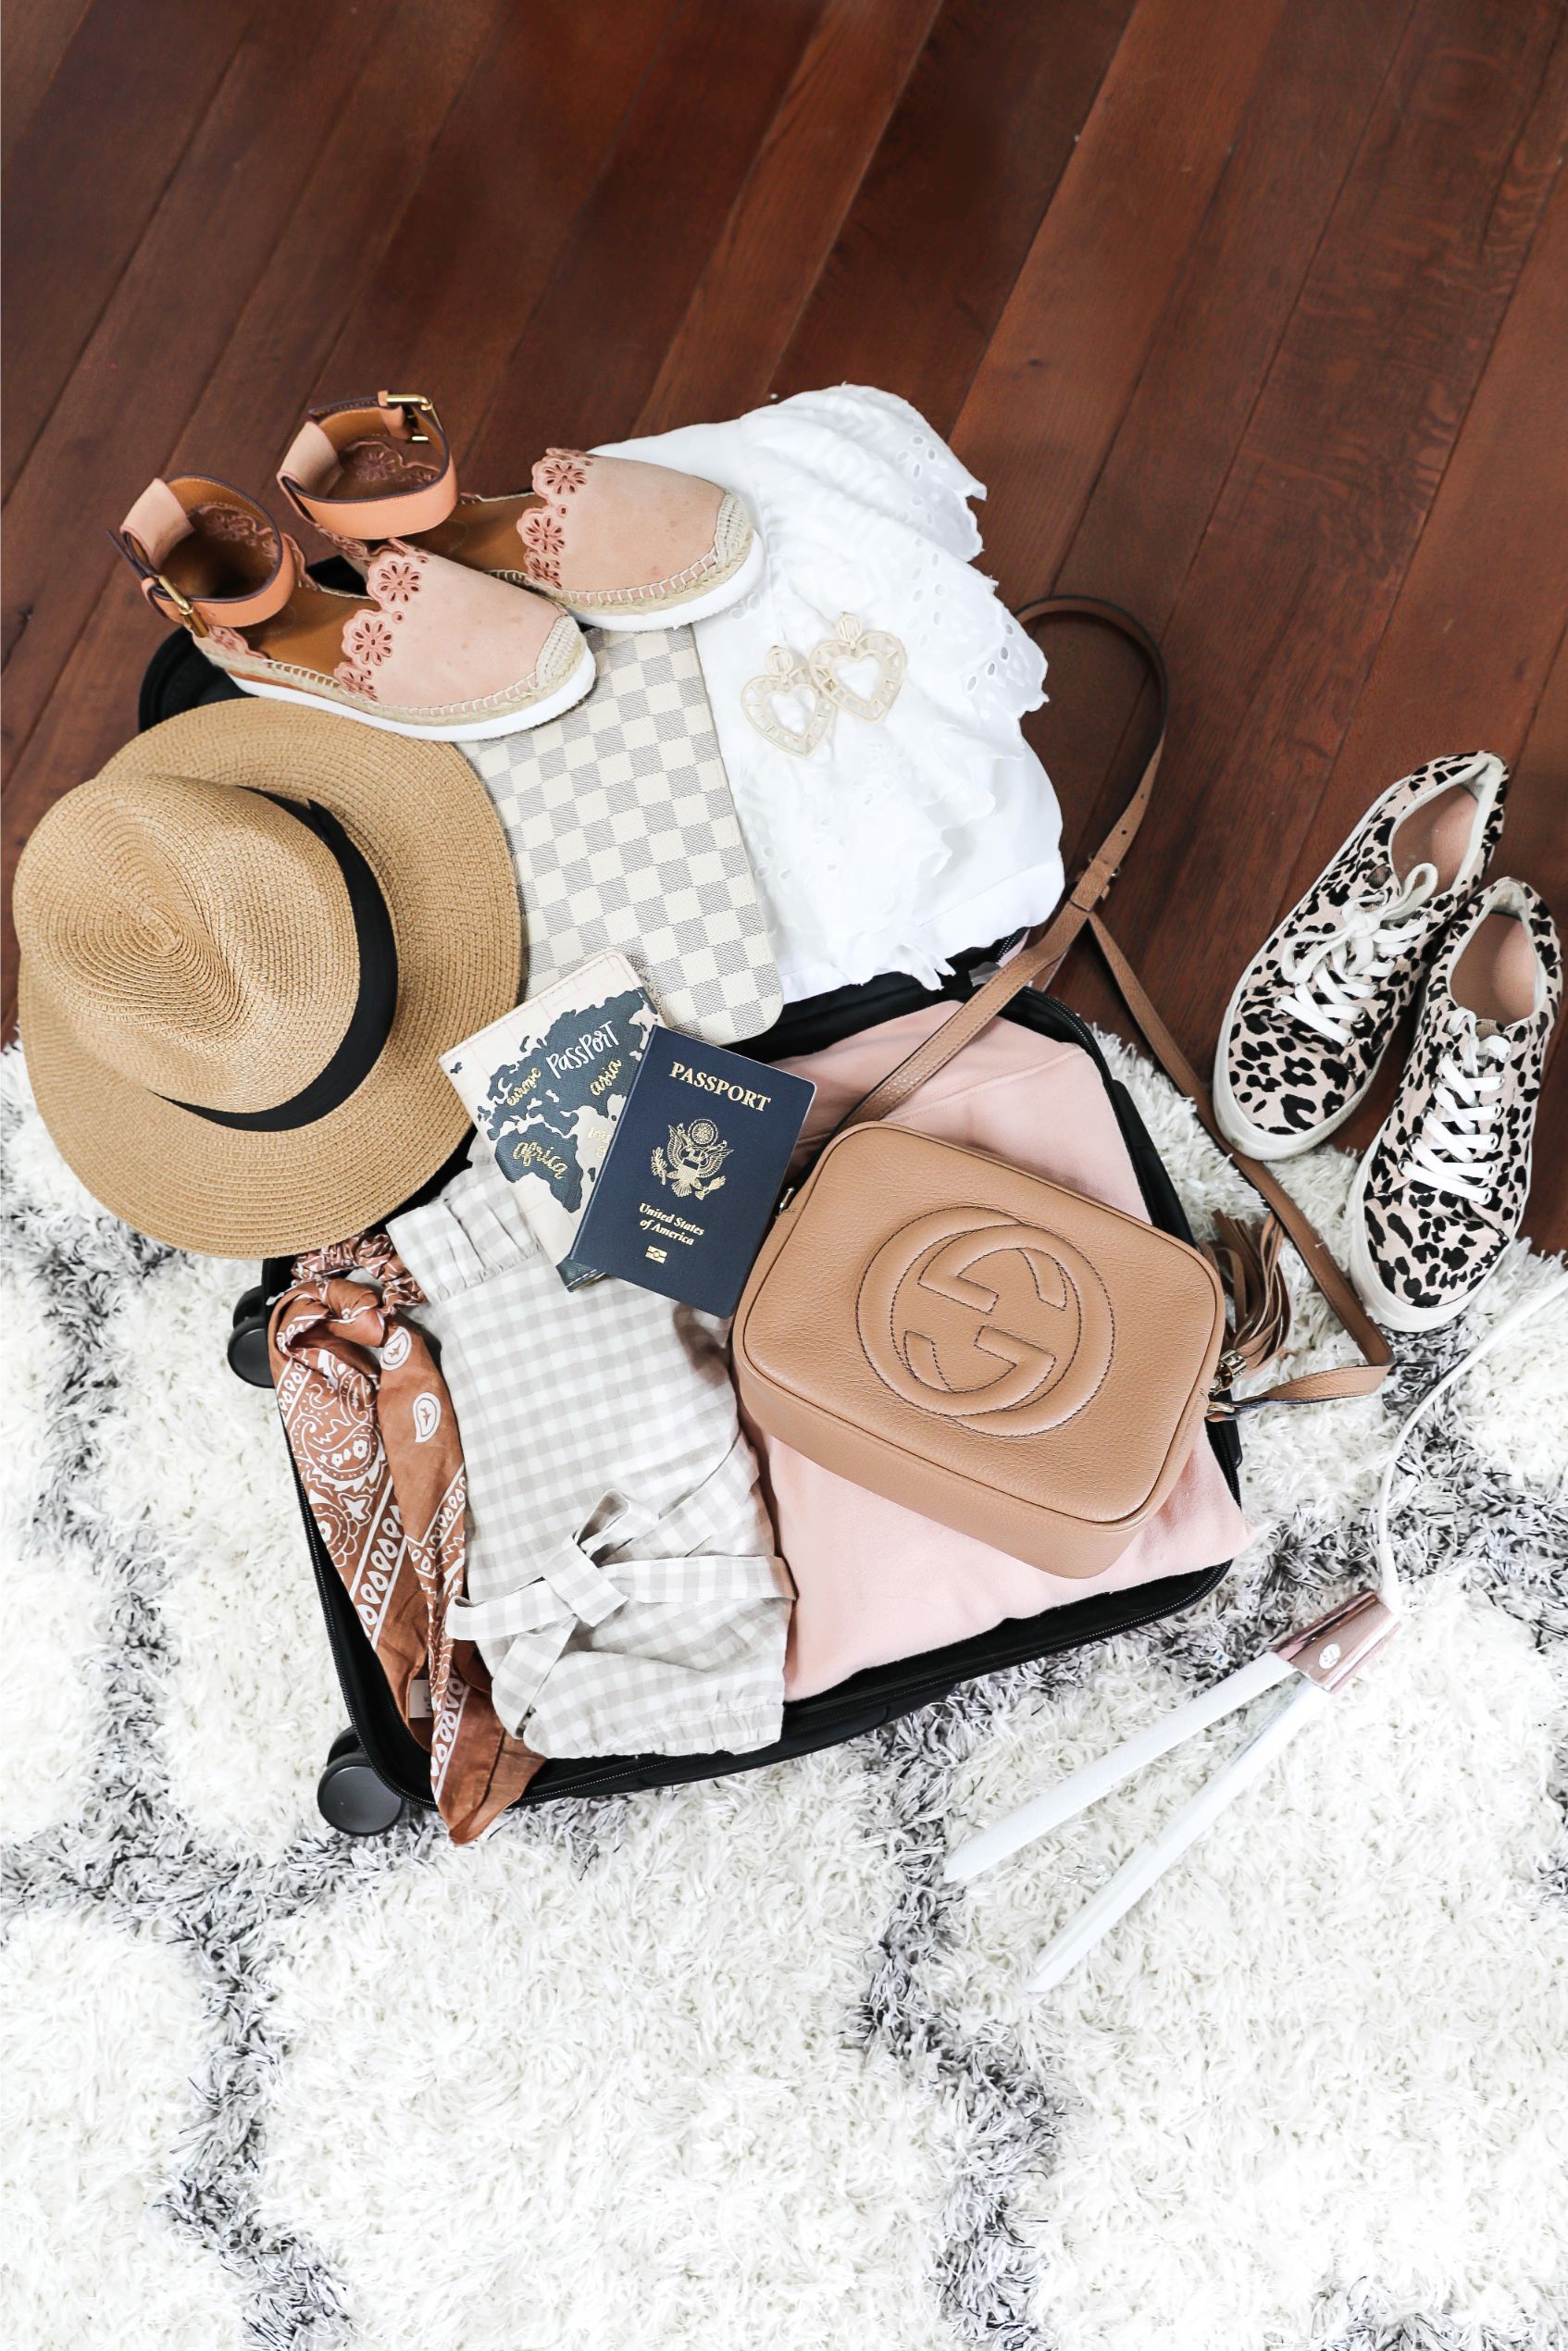 Weekend packing tips short vacation suitcase luggage lifestyle fashion blog daily dose of charm lauren lindmark 